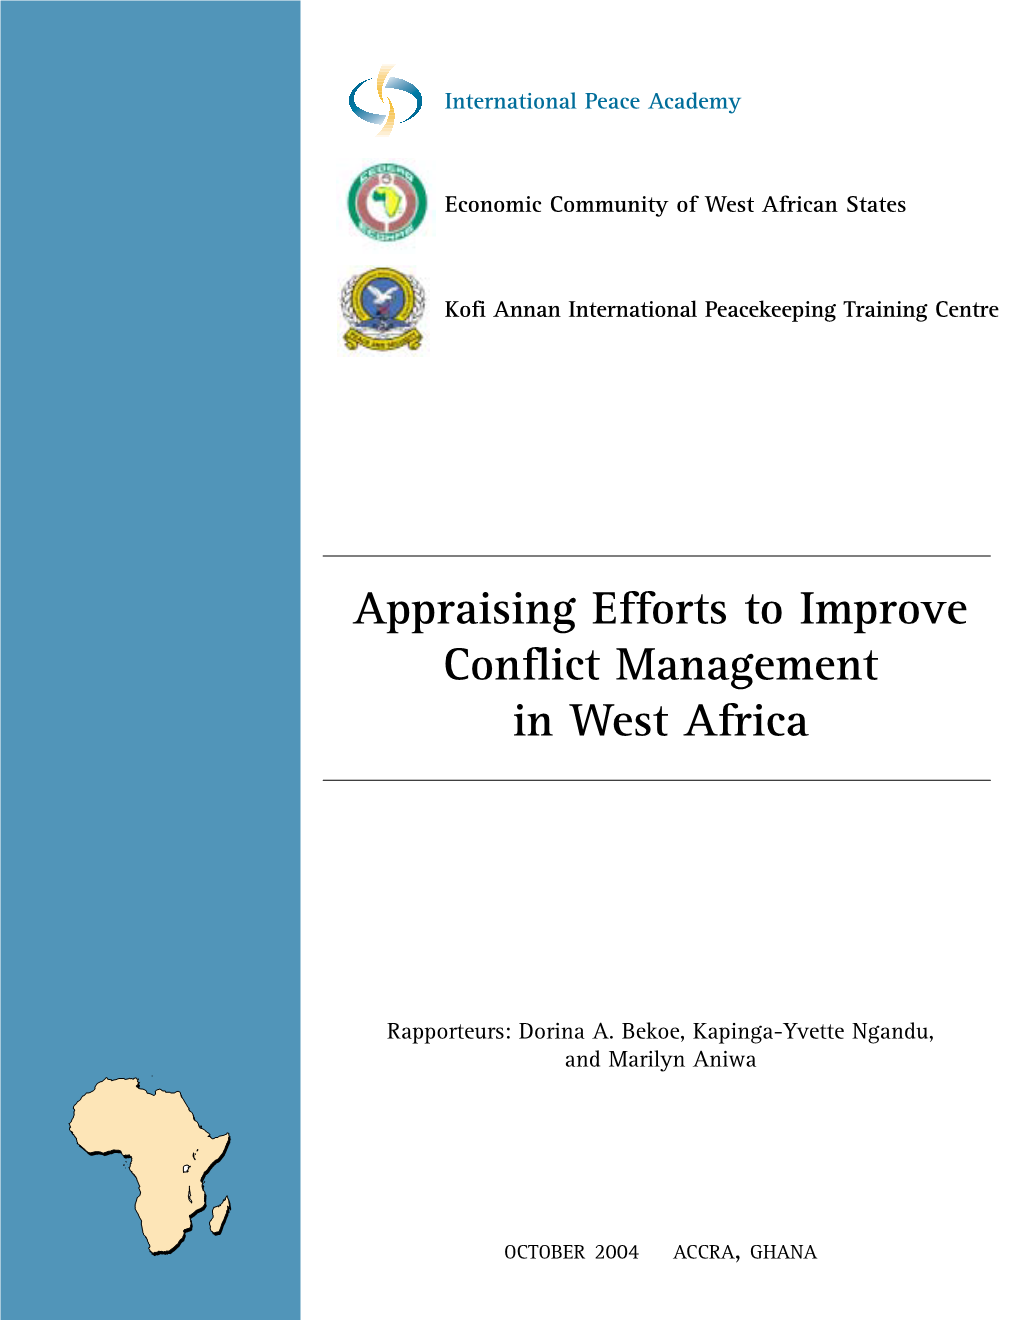 Appraising Efforts to Improve Conflict Management in West Africa